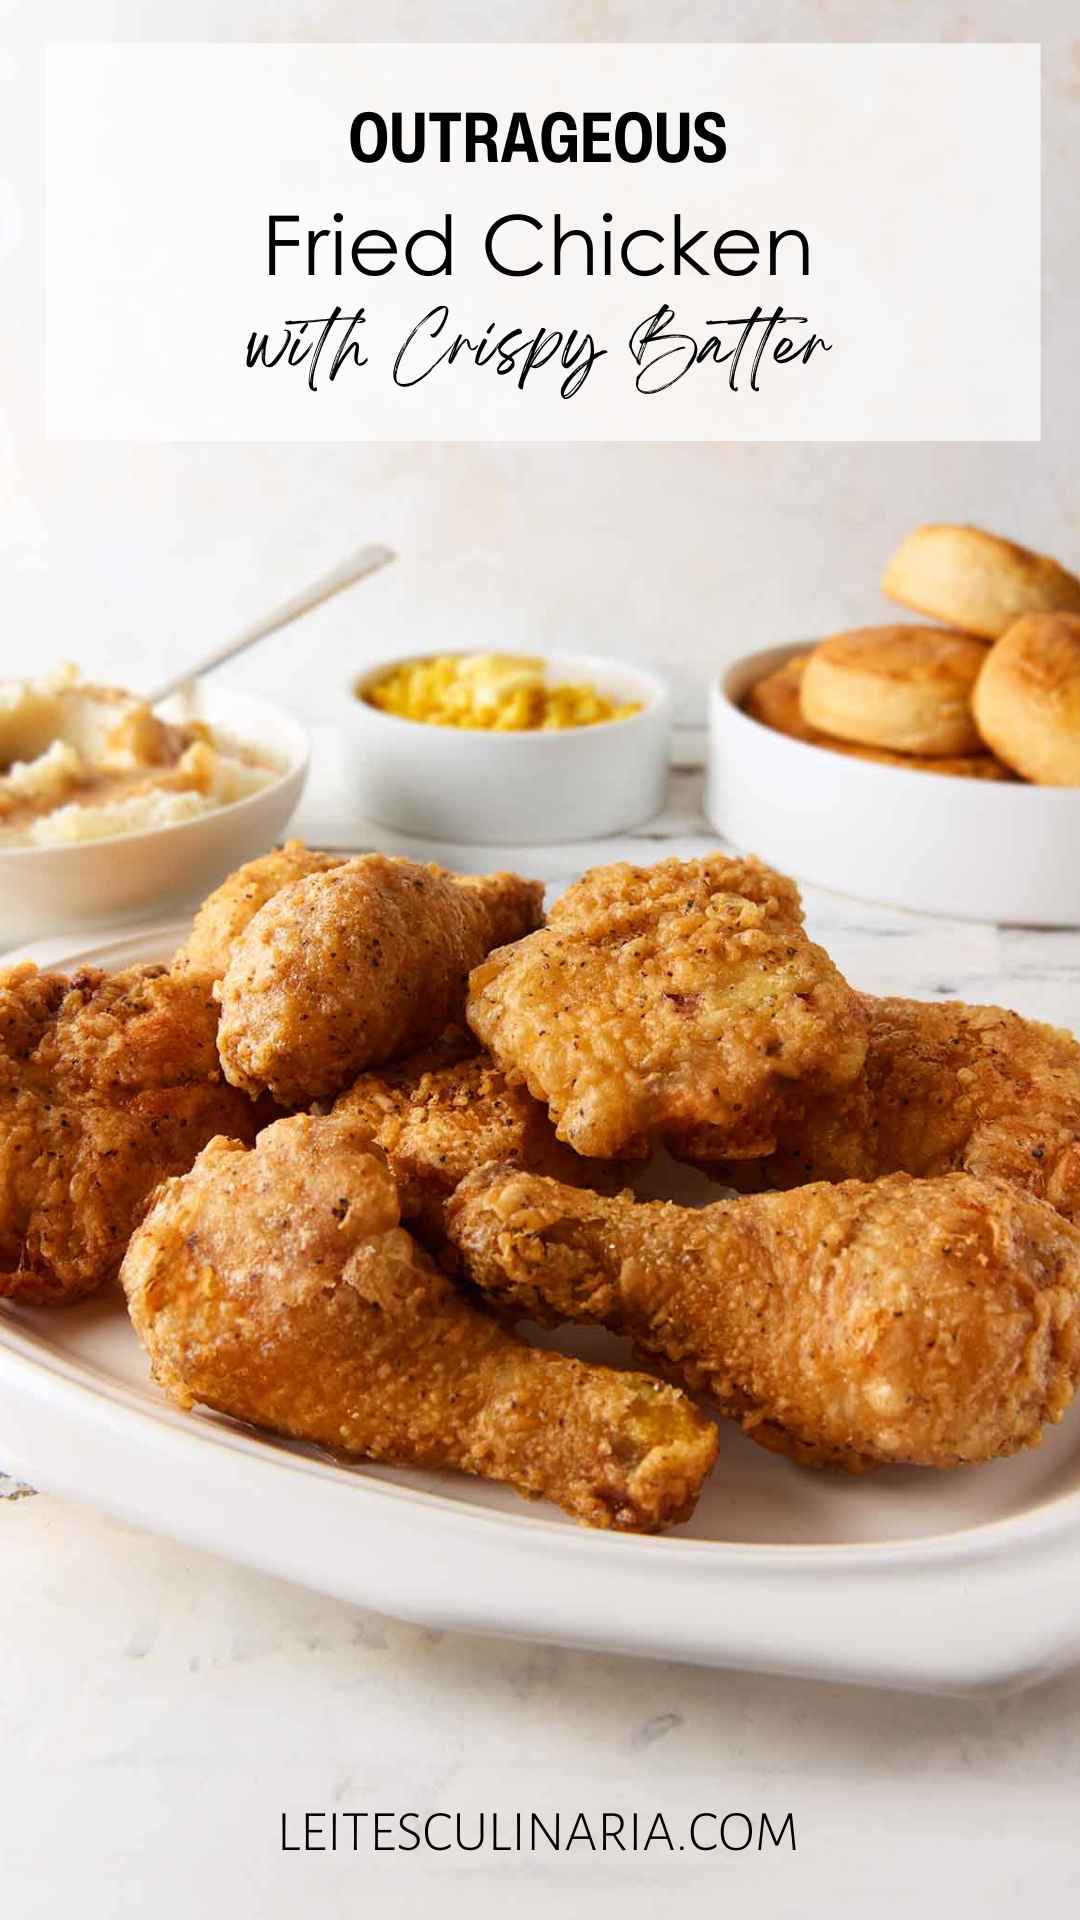 Pieces of batter-fried chicken piled on a white platter.